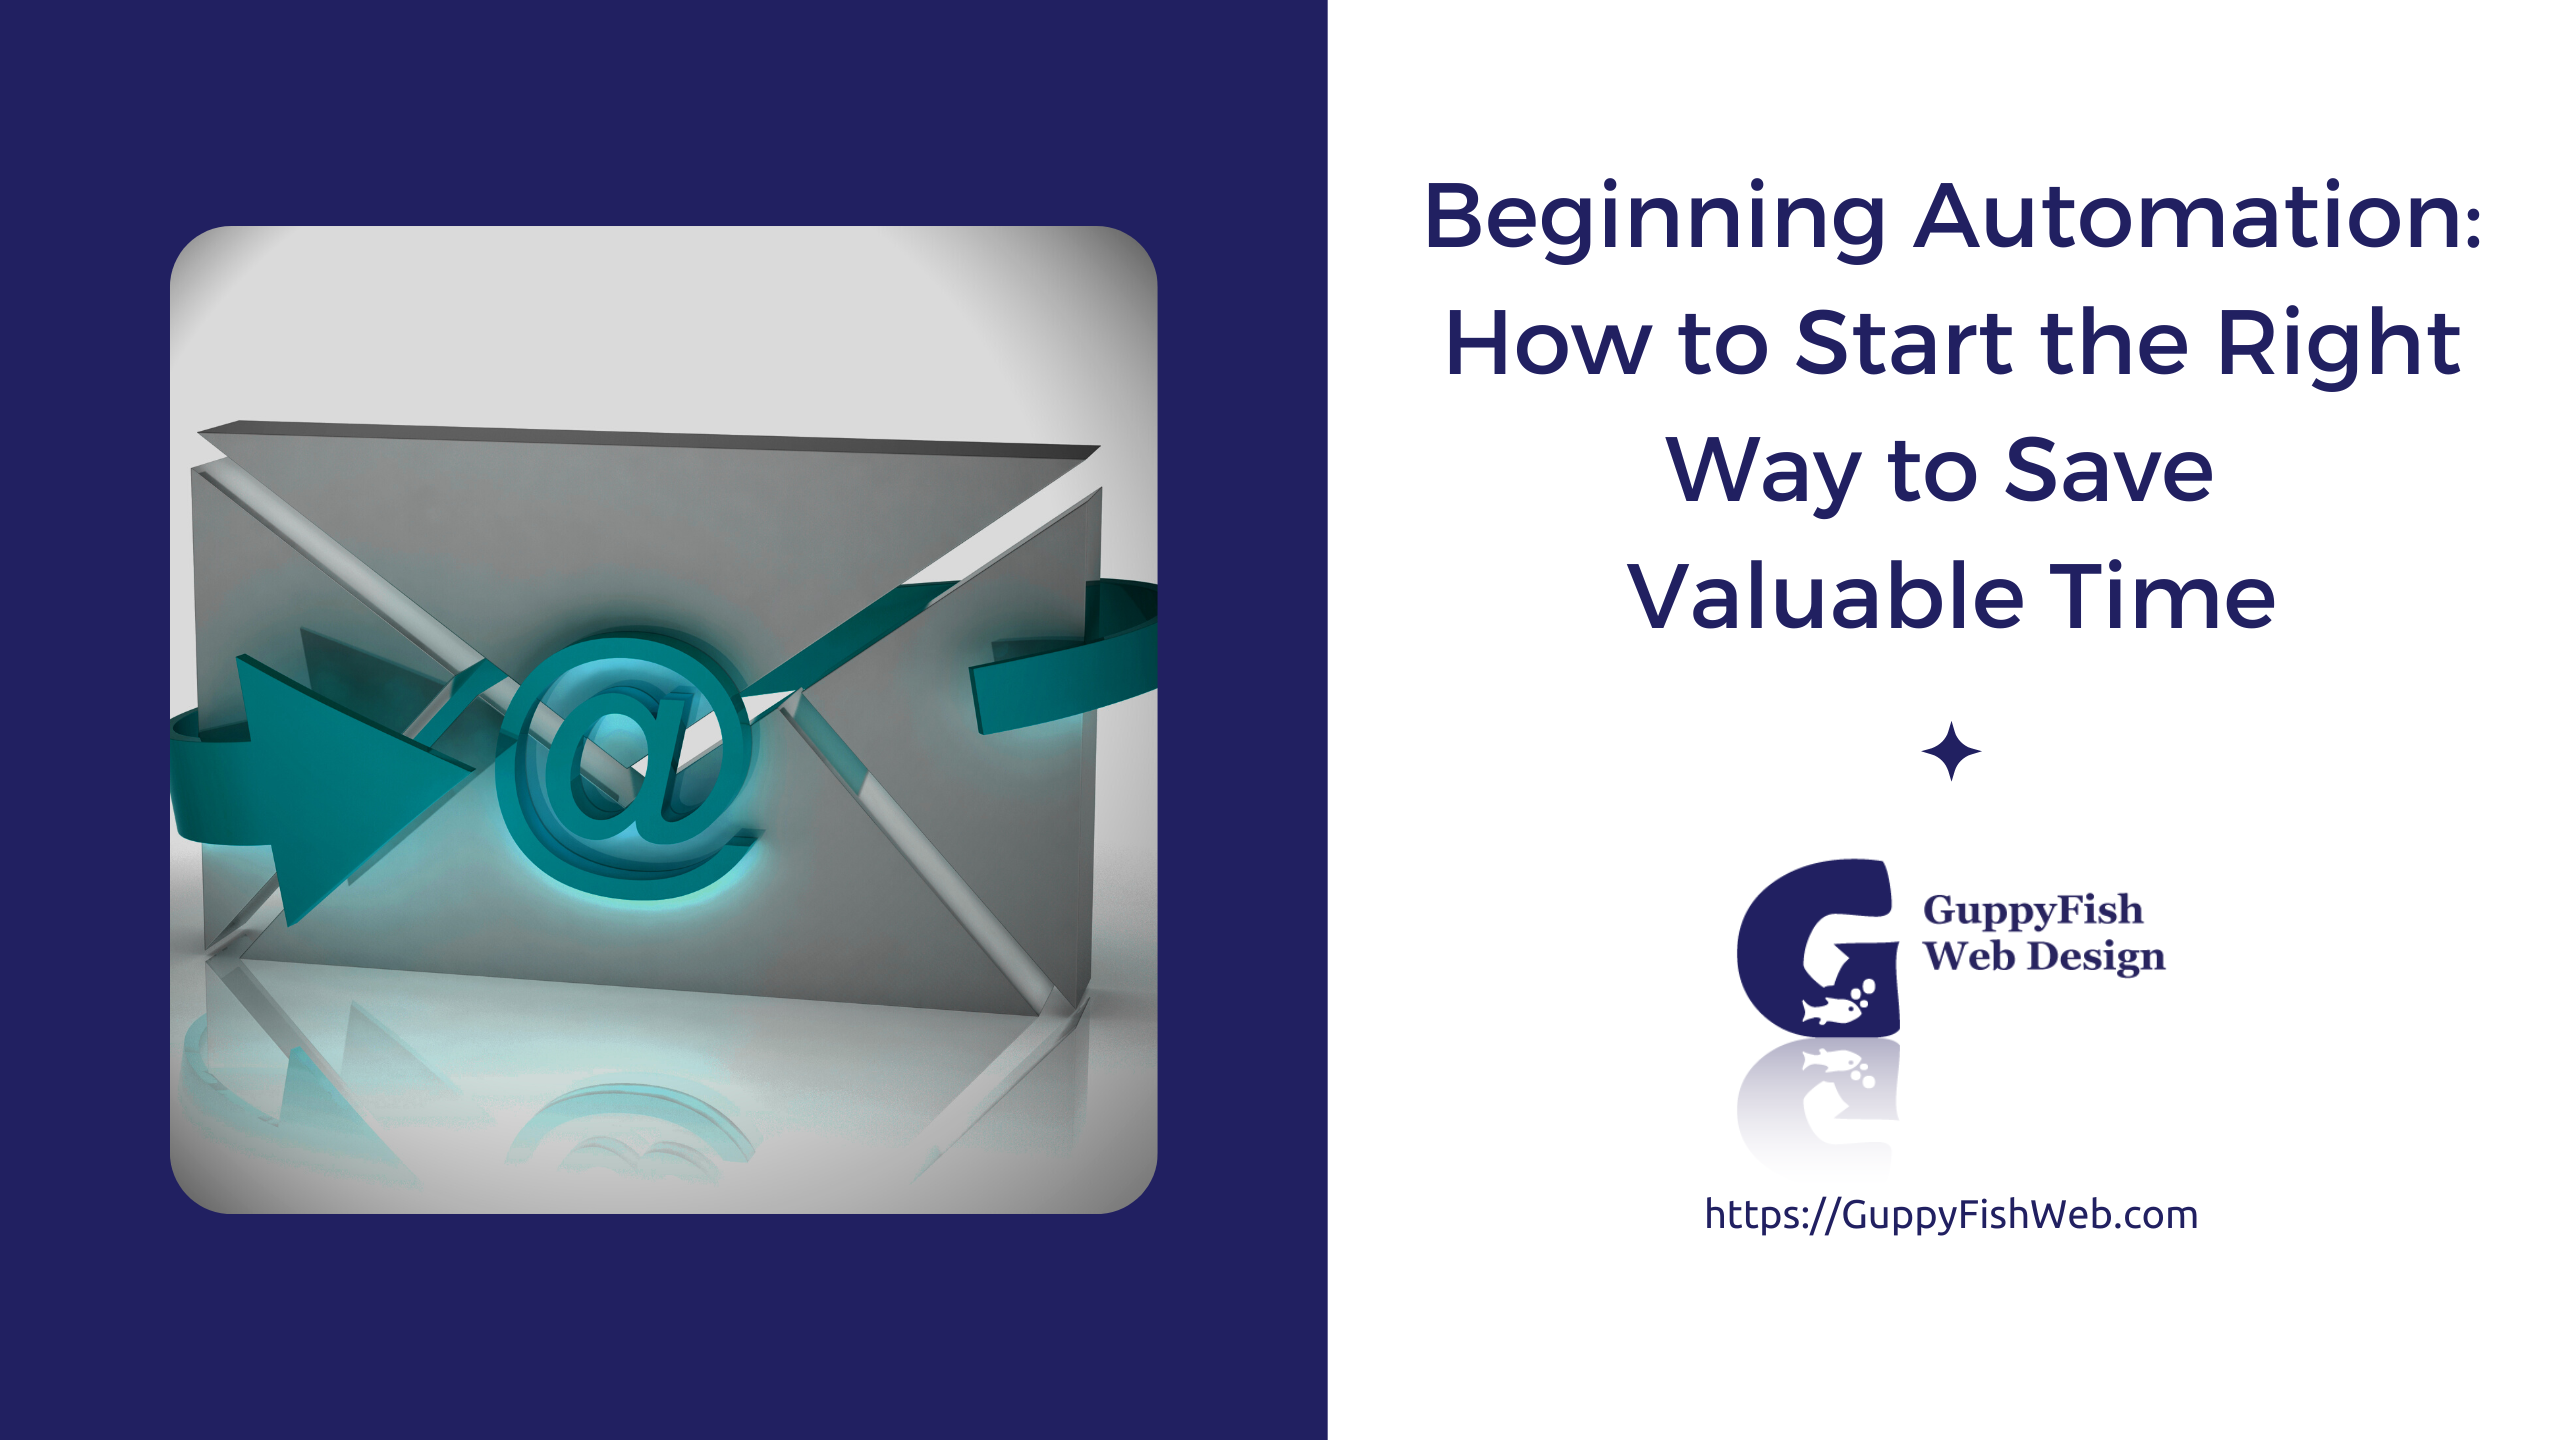 Beginning Automation: How to Start the Right Way to Save Valuable Time